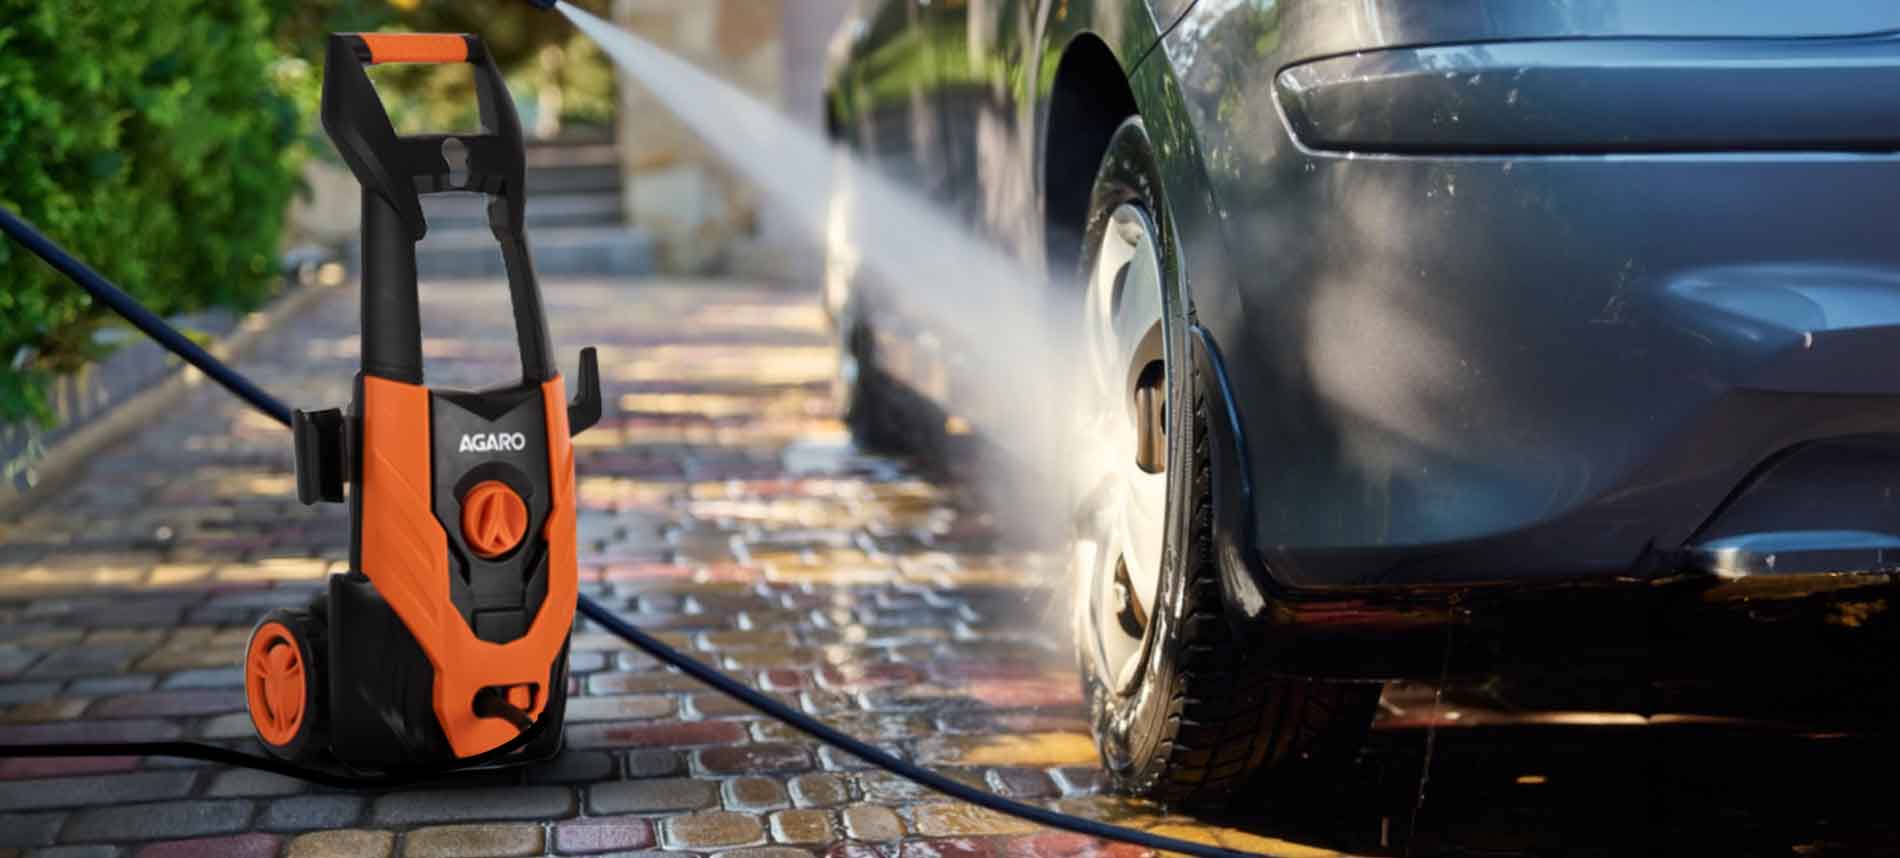 High Pressure Car Wash Machine: A Guide to Features & Pro Tips! – Agaro